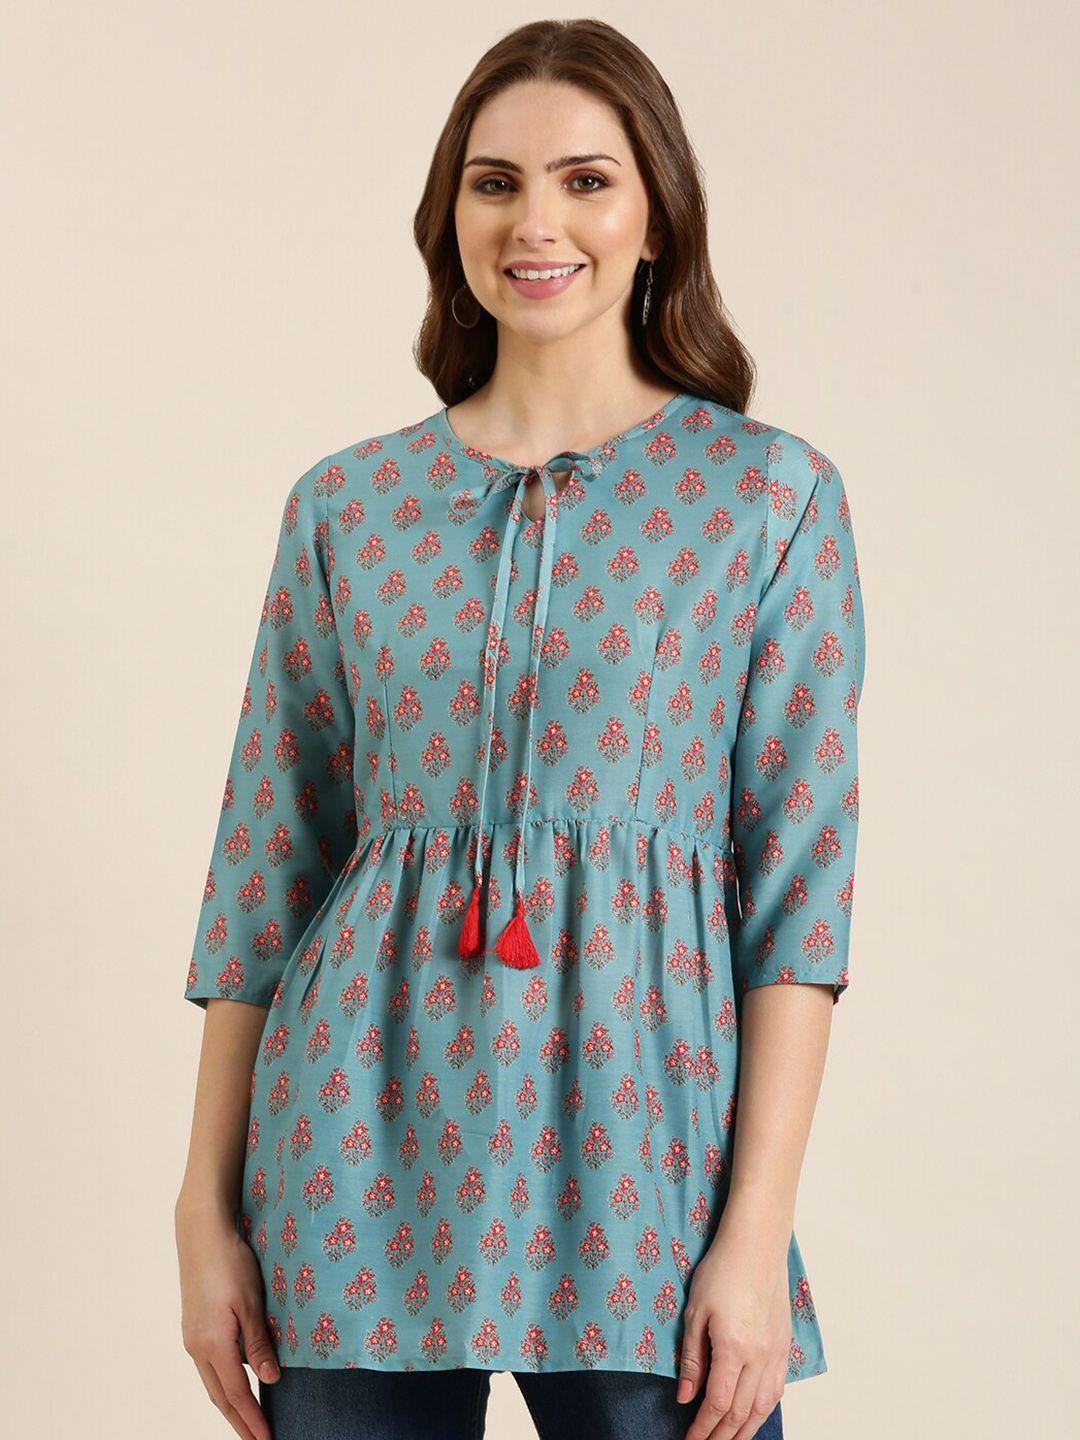 showoff-floral-printed-tie-up-neck-a-line-kurti